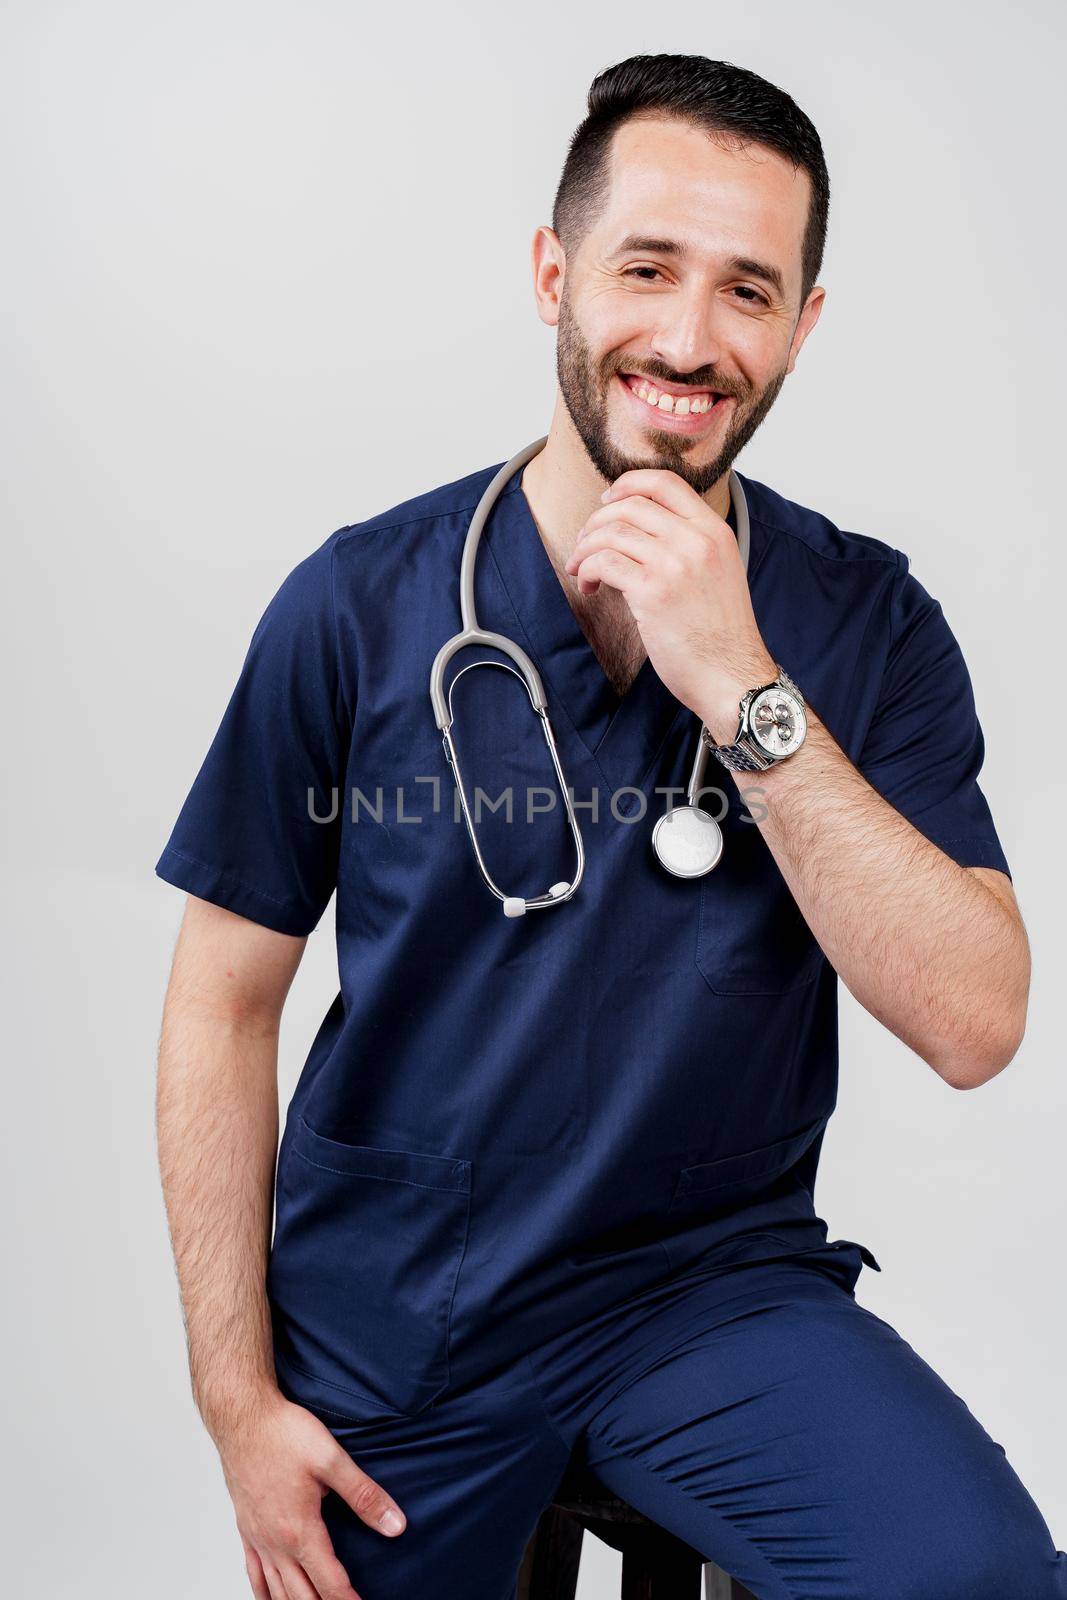 Arabian medical student with stethoscope in surgical uniform smiles on blanked background. Handsome bearded man in studio. Confident doctor at consultation